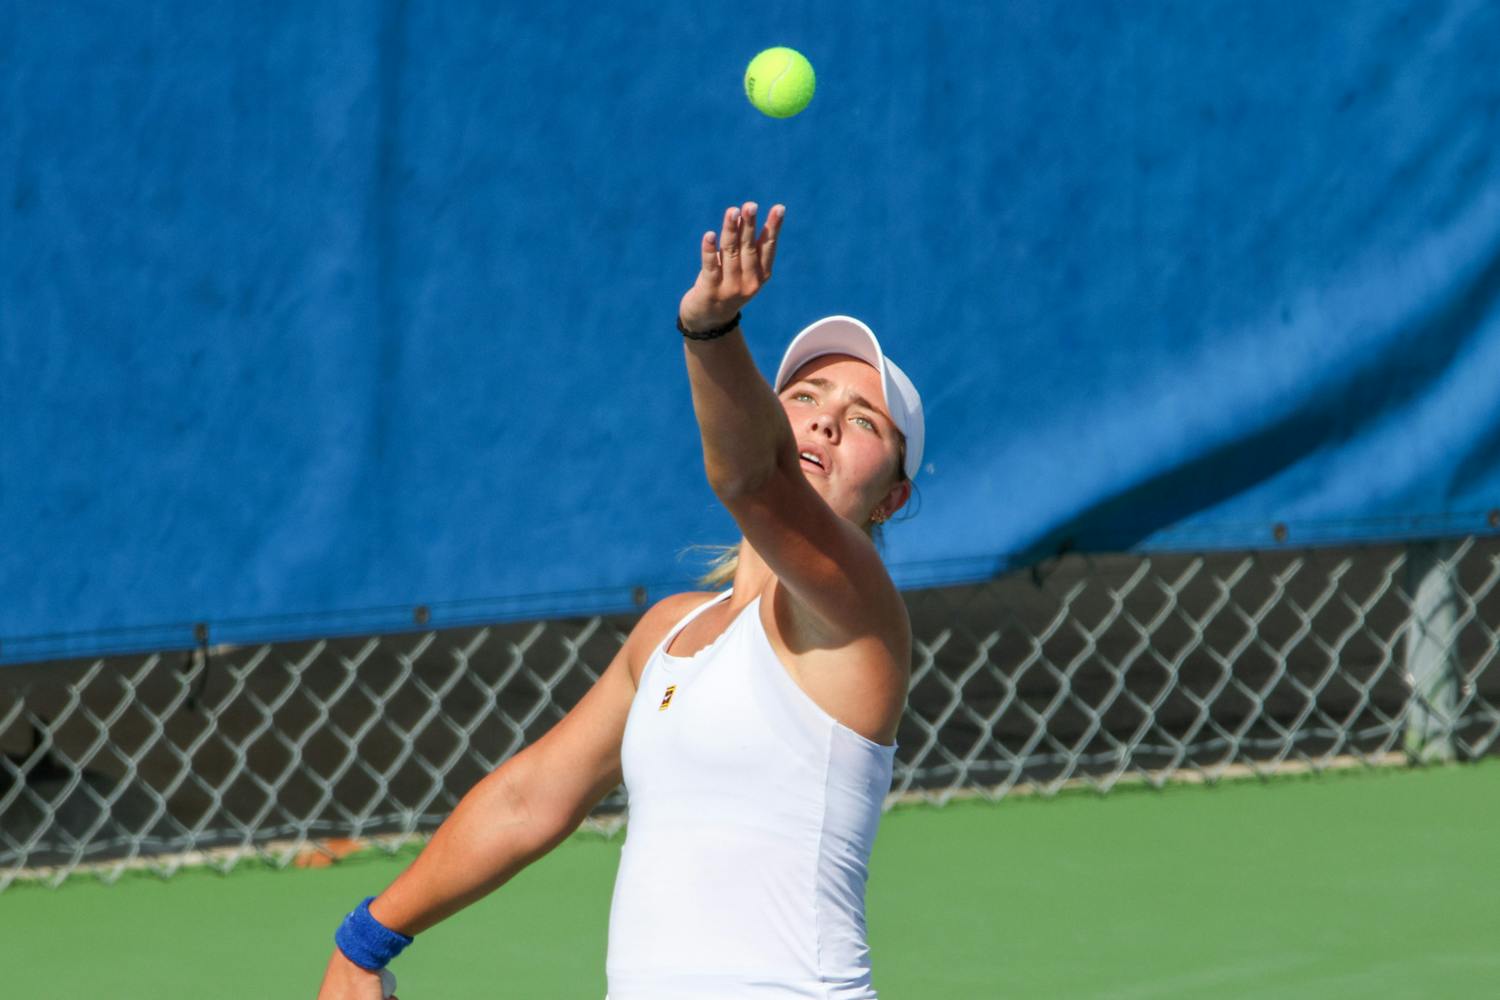 Florida freshman Rachel Gailis serves the ball during the Gators' 4-1 win against the No. 3 Michigan Wolverines Wednesday, March 22, 2023.